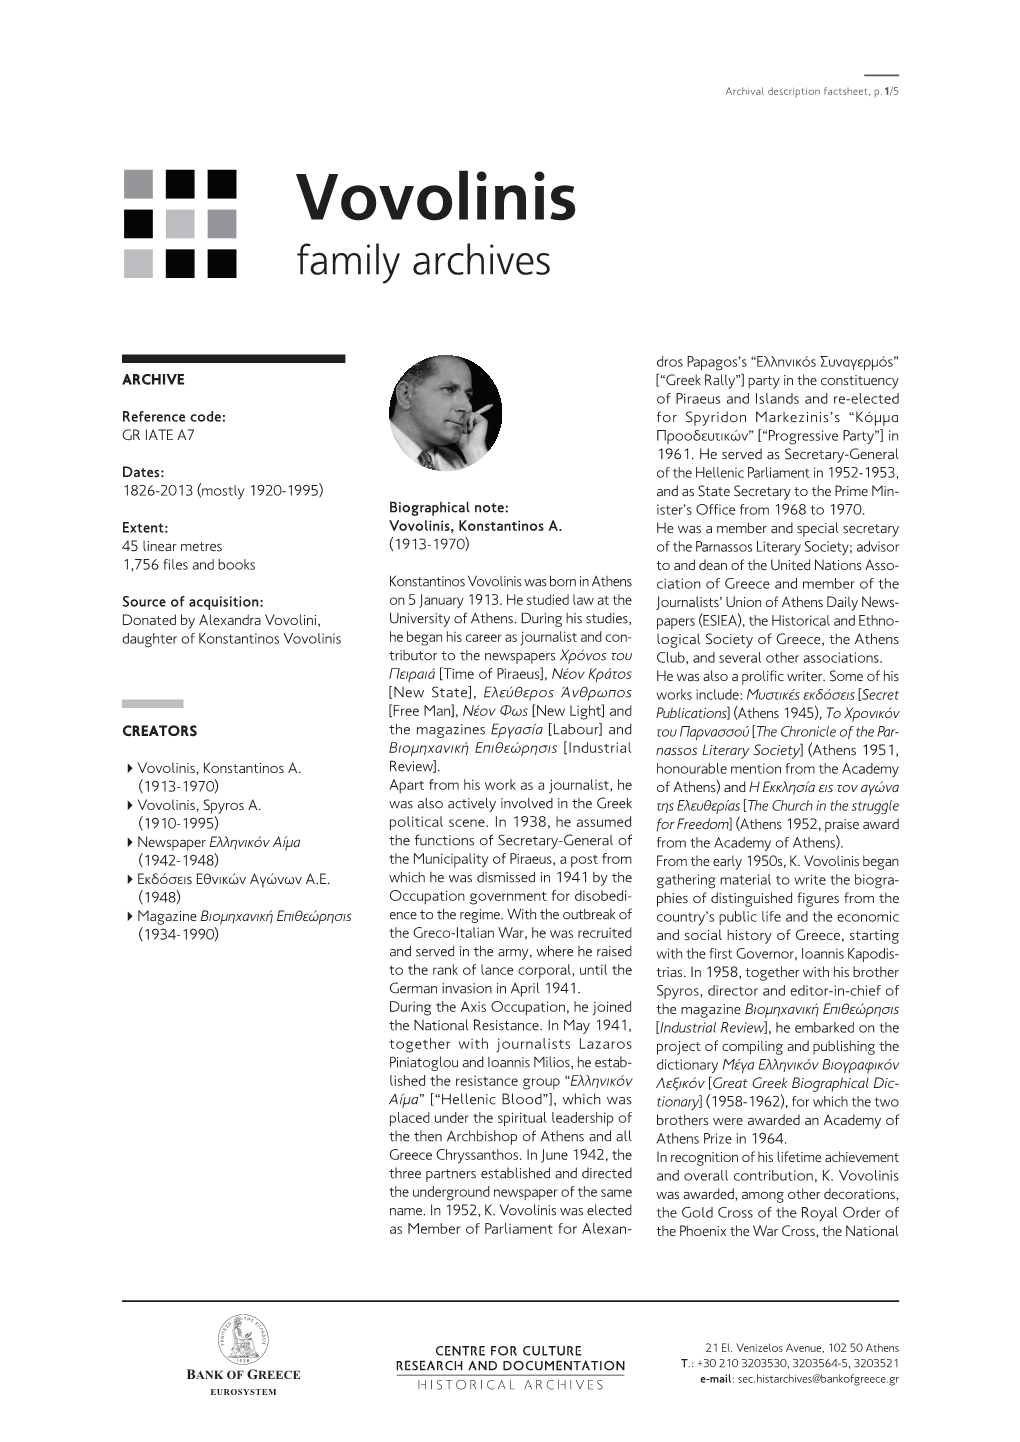 Vovolinis Family Archives Factsheet